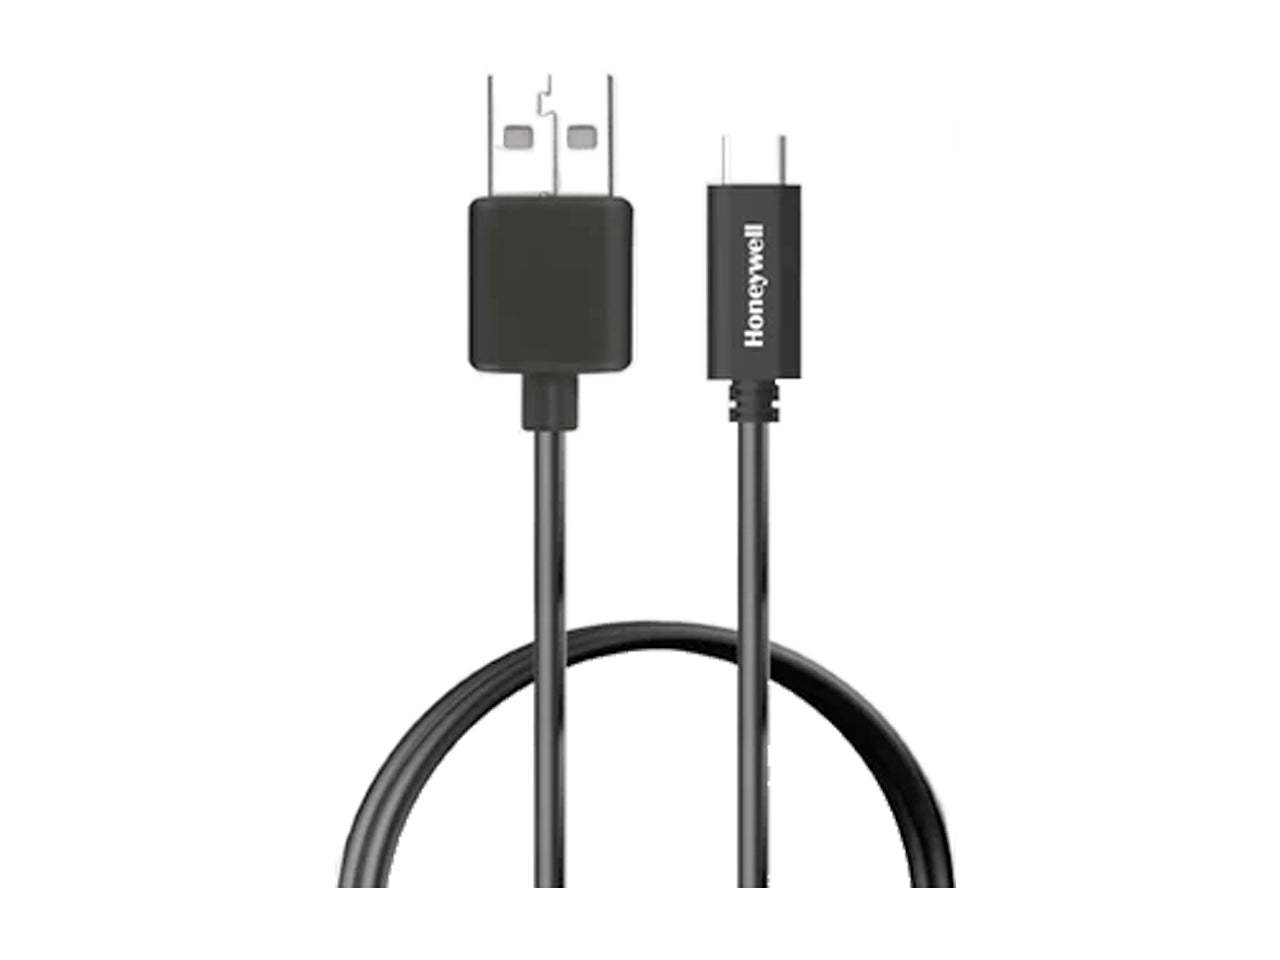 Honeywell USB 2.0 to Type C cable 1.2mtr (Non Braided) Black